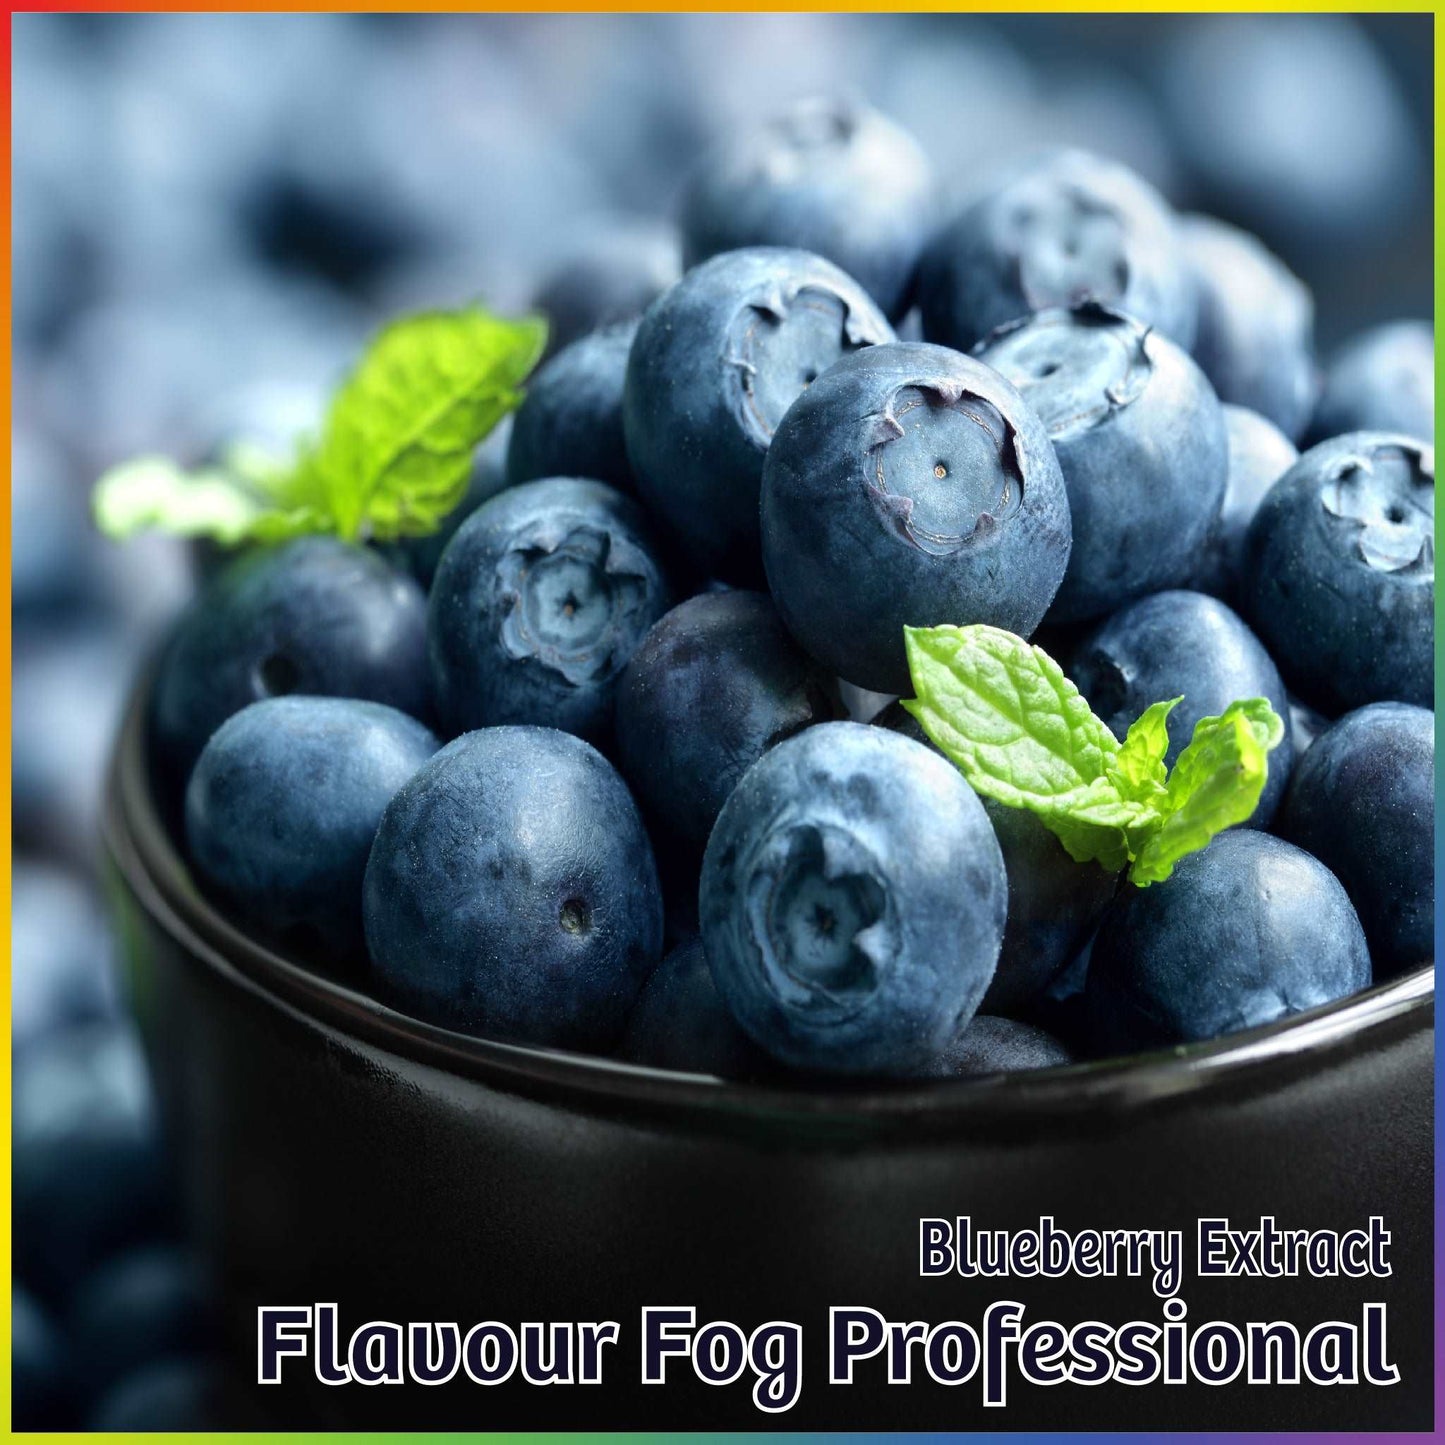 Blueberry Extract - FF Pro - Flavour Fog - Canada's flavour depot.